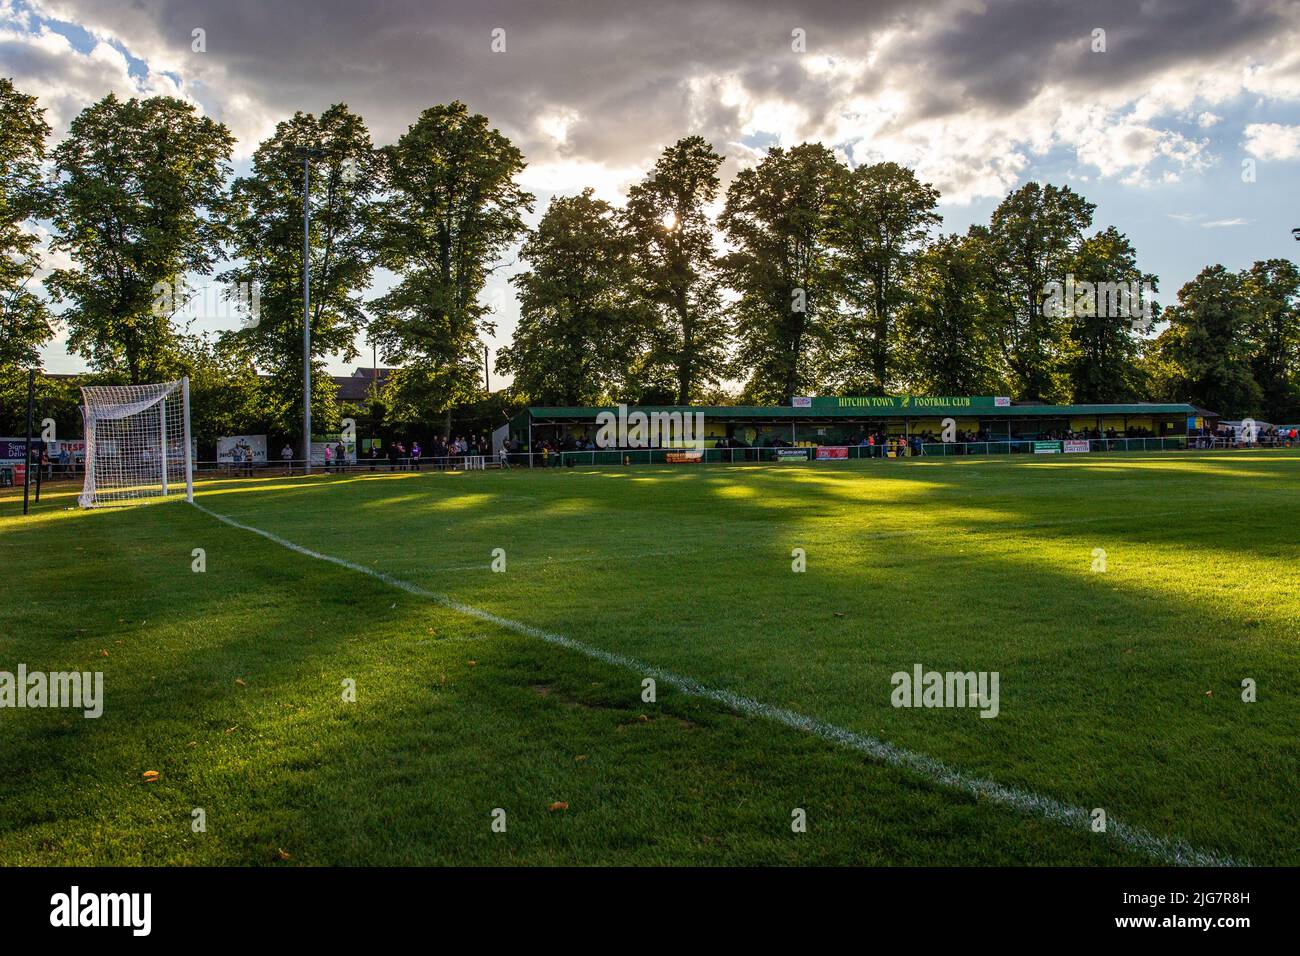 Football pitch at non league ground Hitchin Town Stock Photo